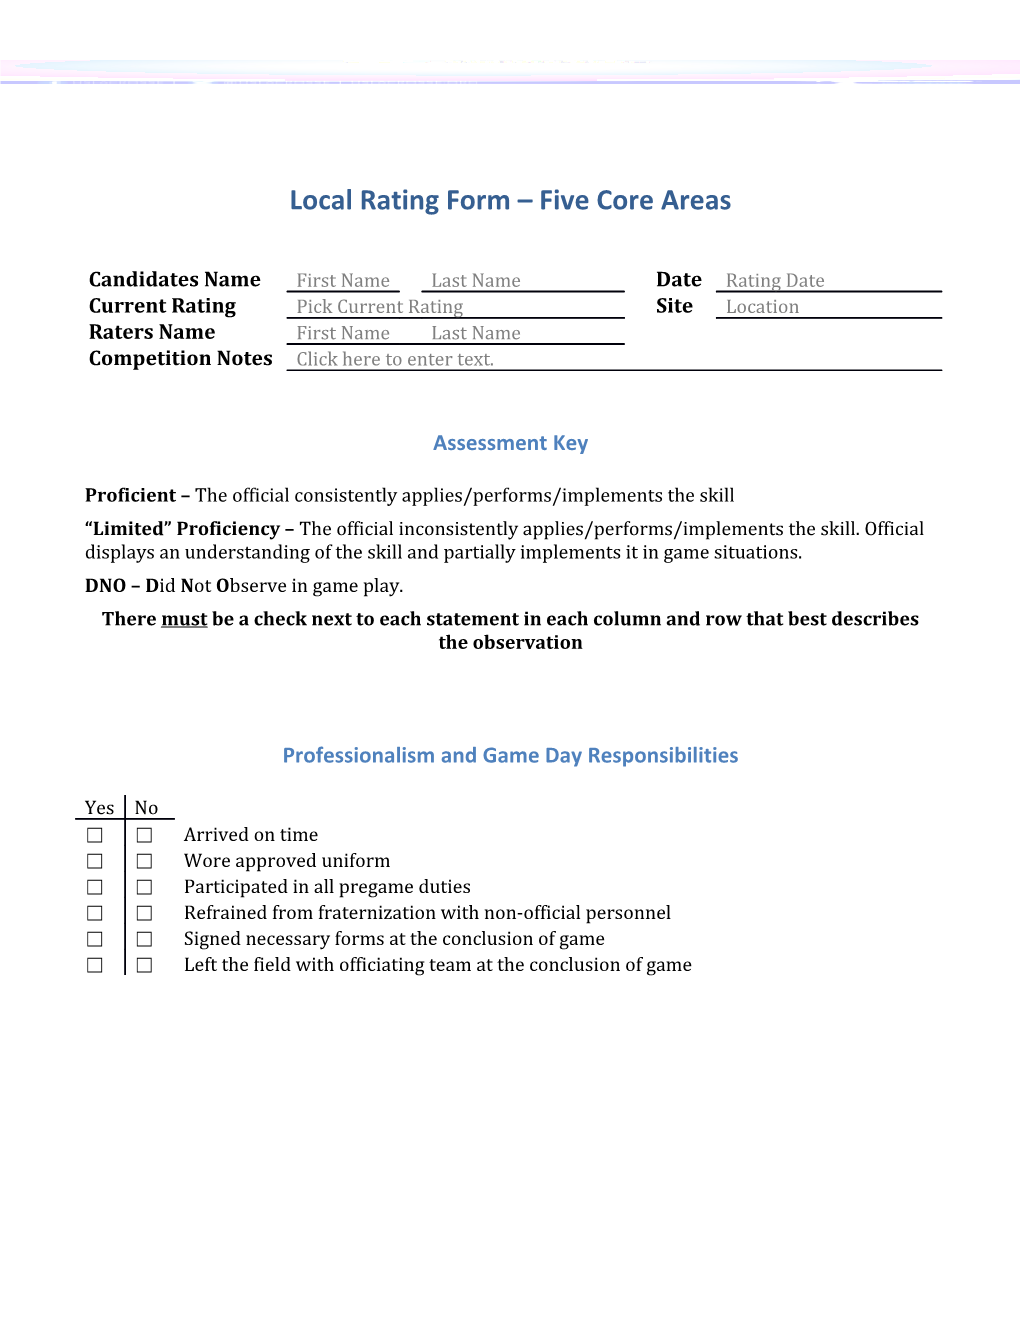 Local Rating Form Five Core Areas